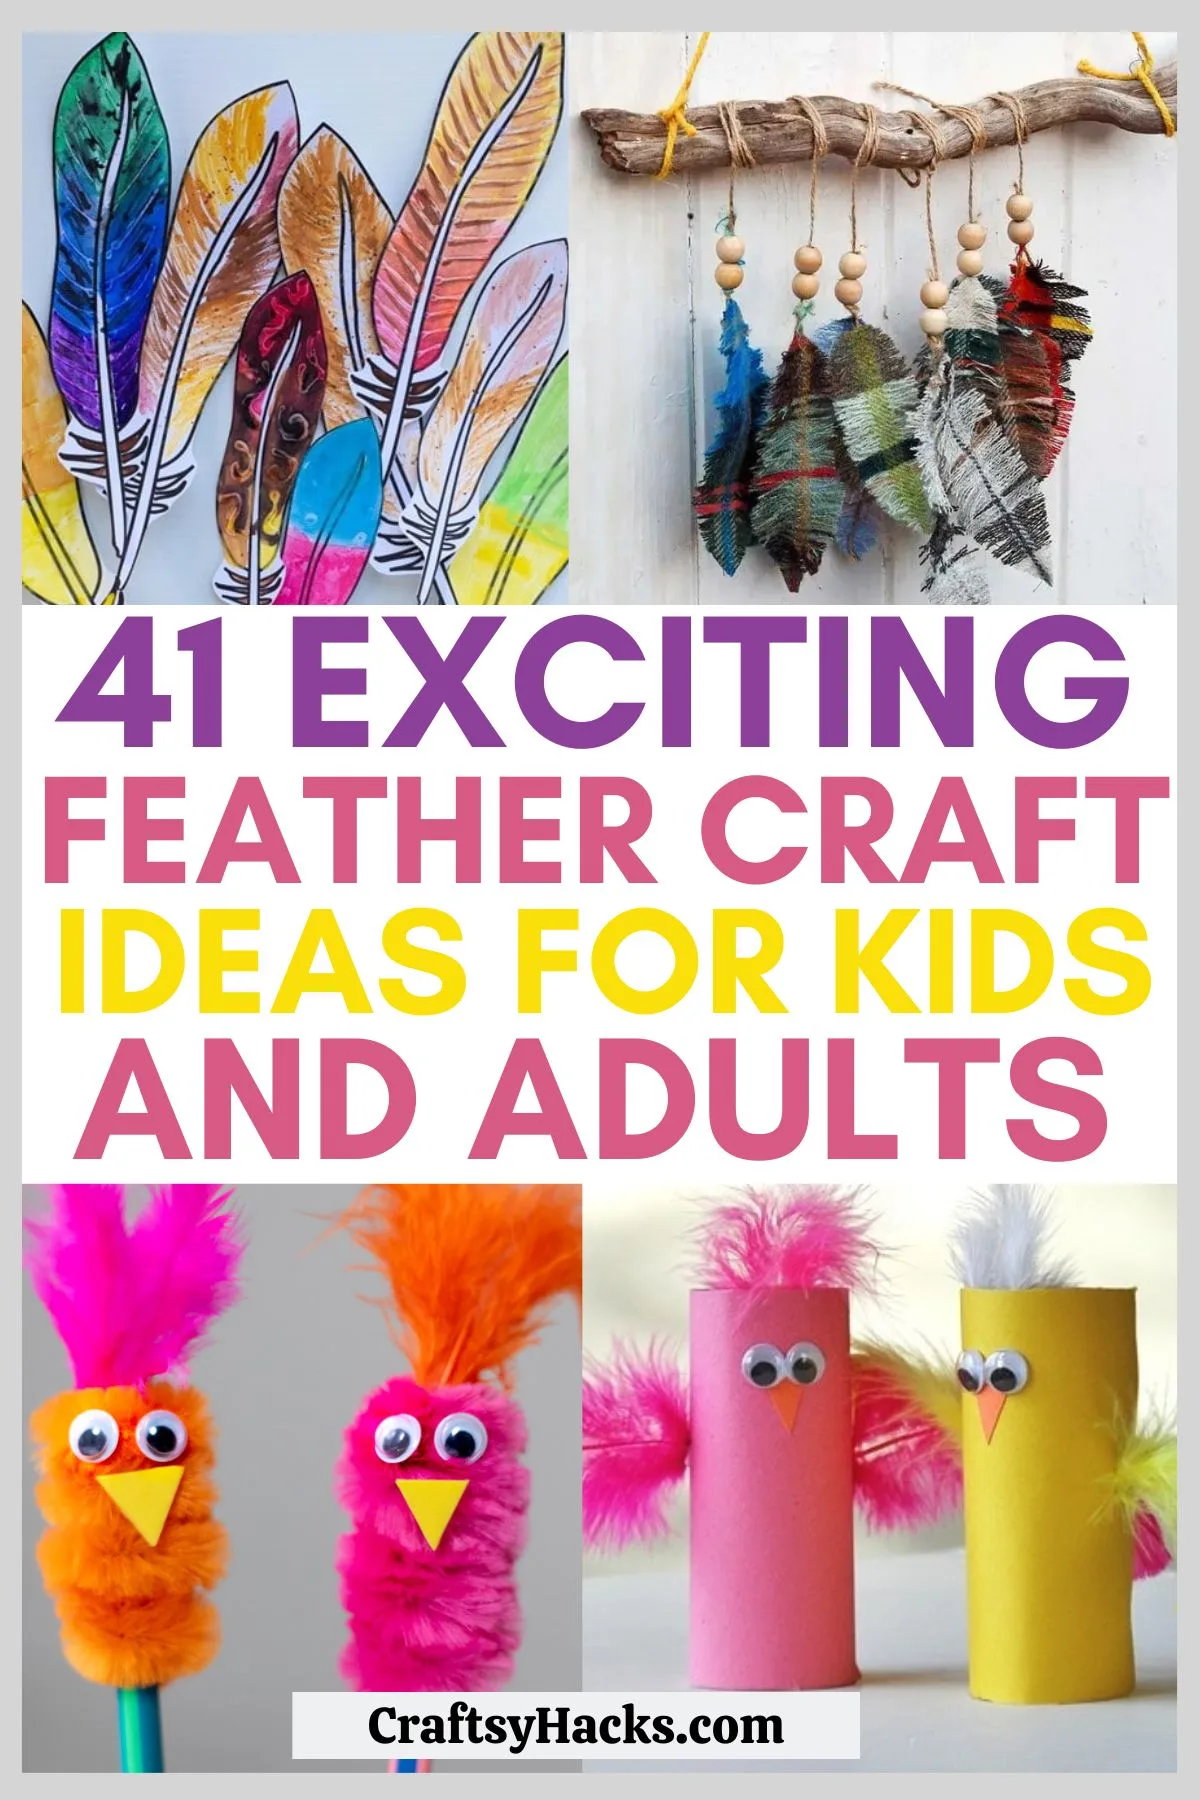 21 Feather Crafts And DIYs - You Will Want To Make - Pillar Box Blue